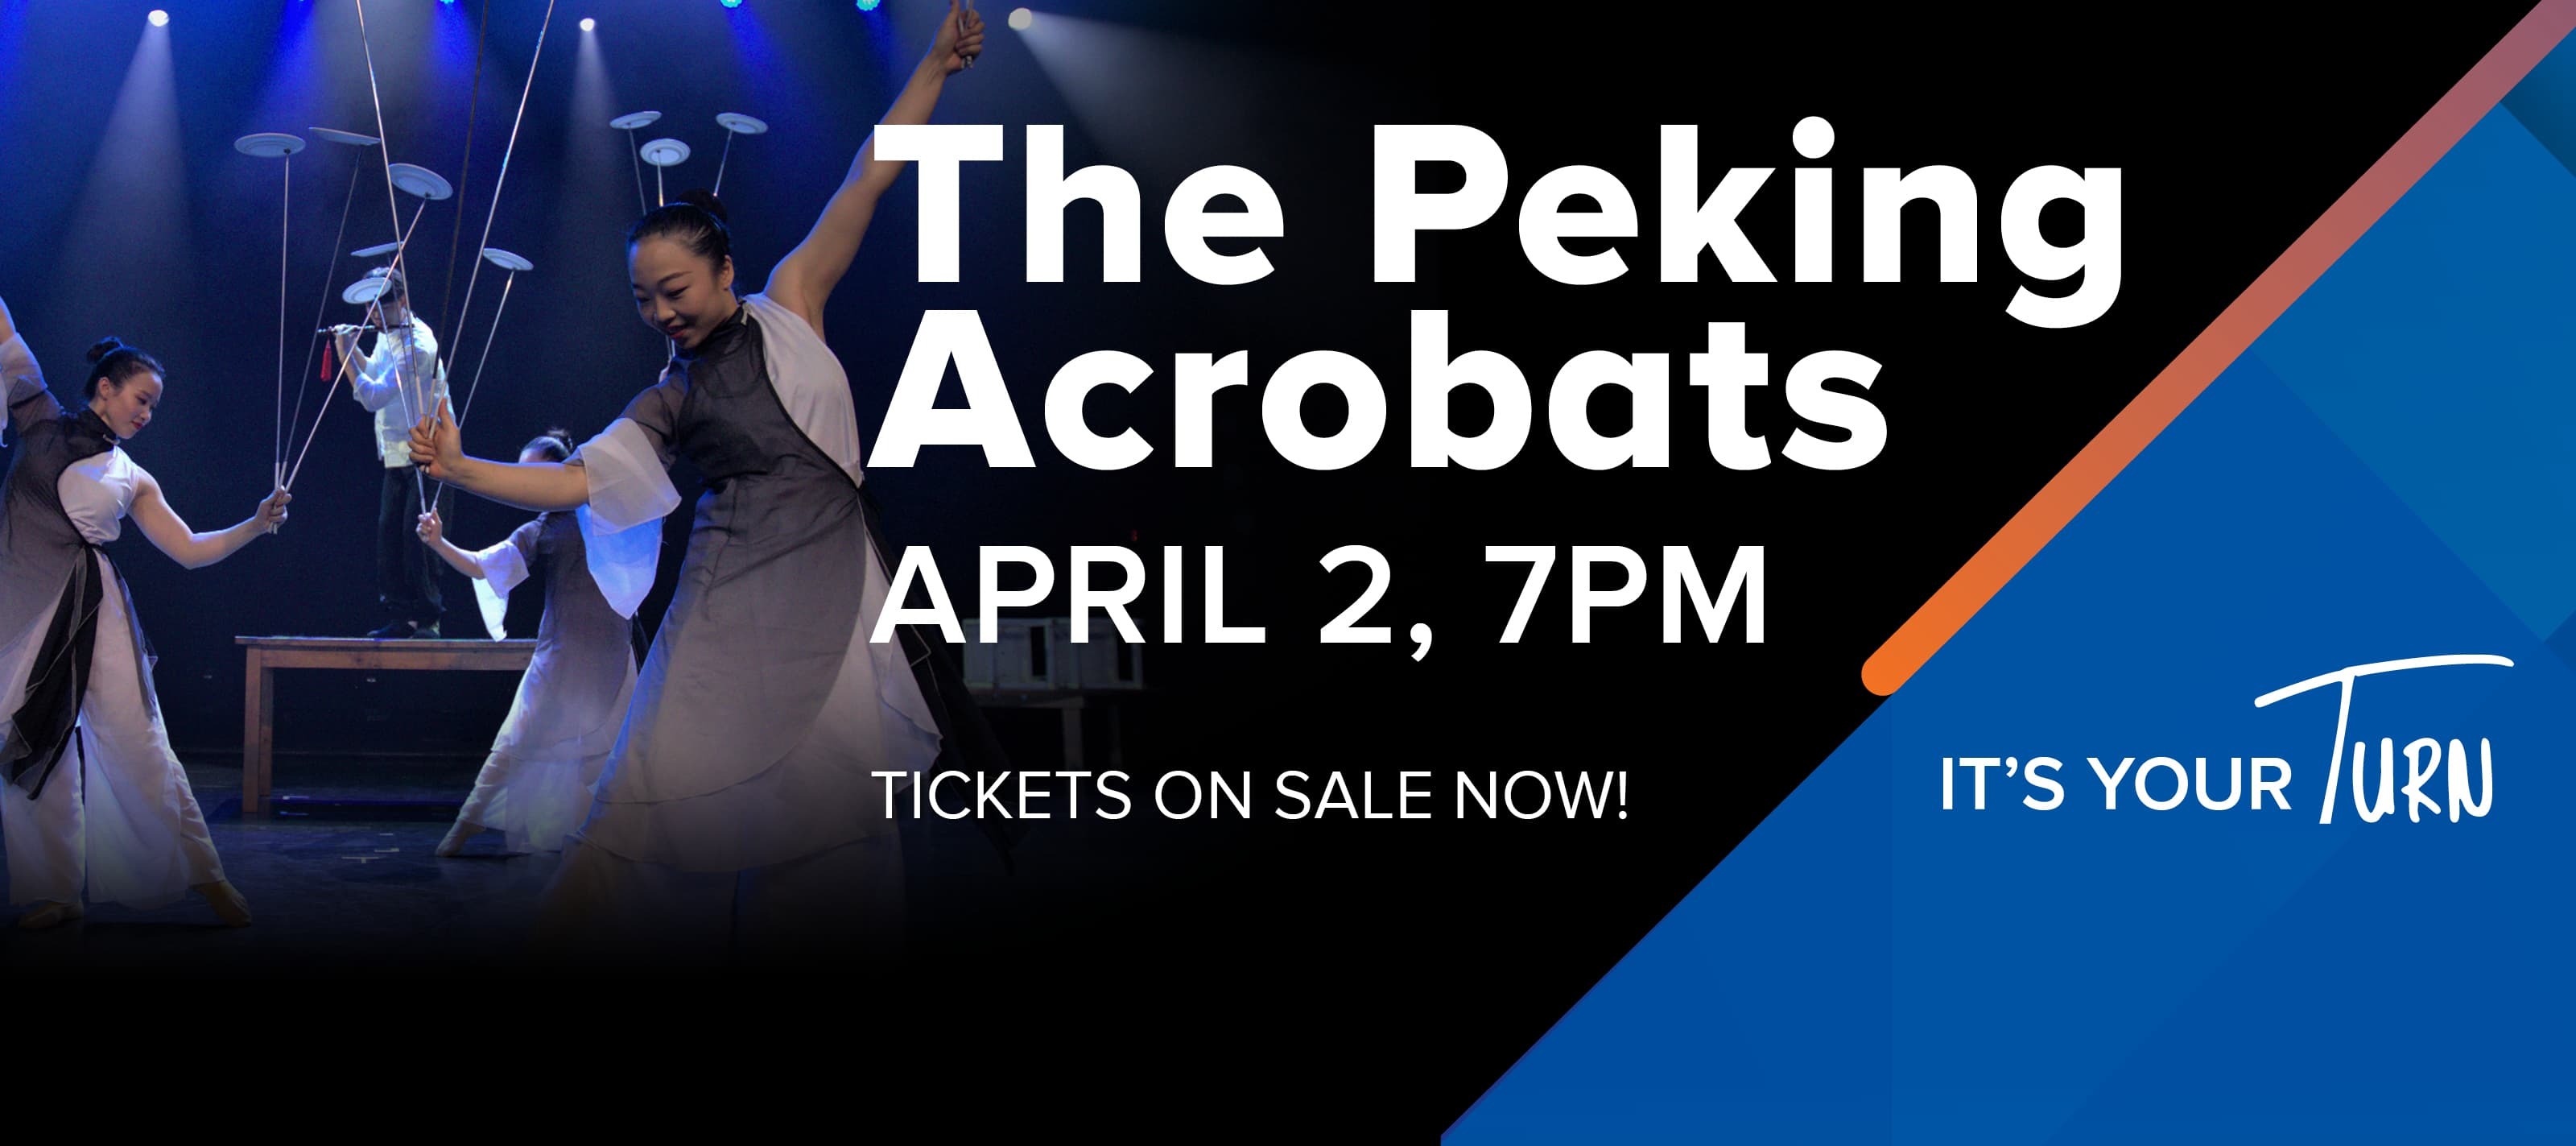 The Peking Acrobats April 2 at 7pm Tickets On Sale Now